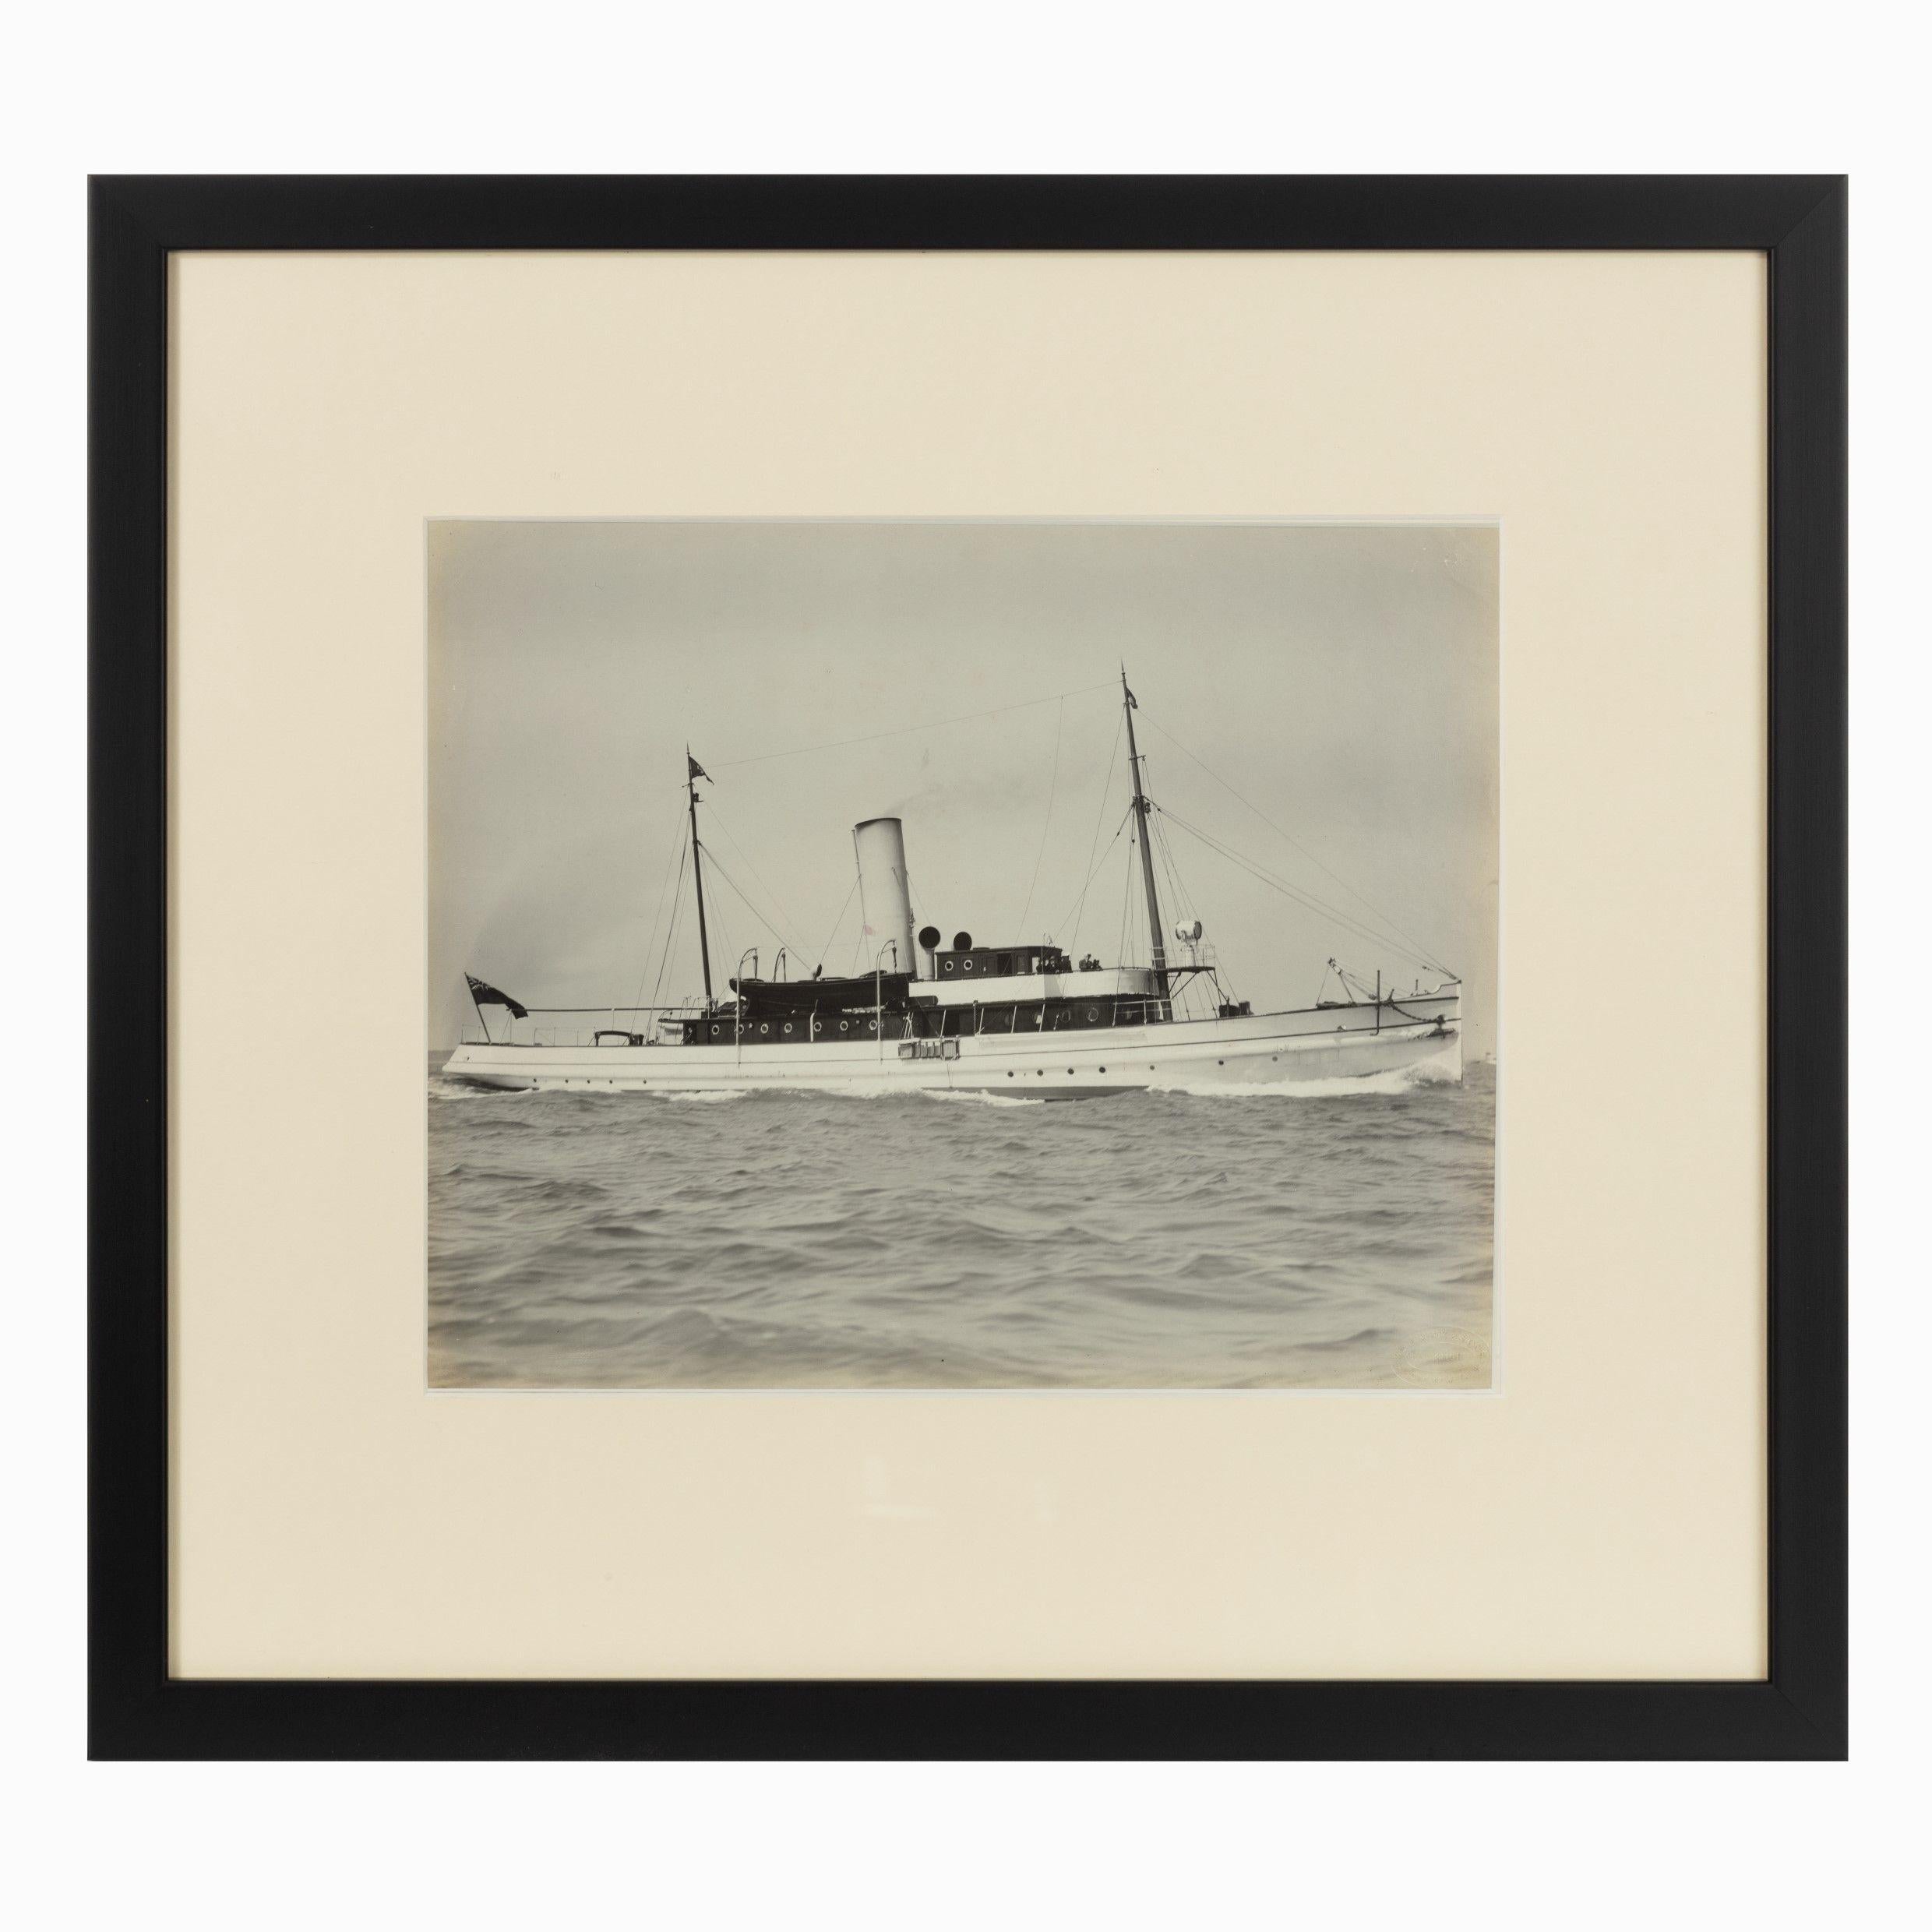 Early silver gelatin Photographic print the Steam yacht Cressida at anchor in the Solent, By Kirk and Sons Cowes. Embossed crown stamp by Appointment, to the right hand side.

William Umpleby Kirk (Kirk and Sons) A photographer of the late